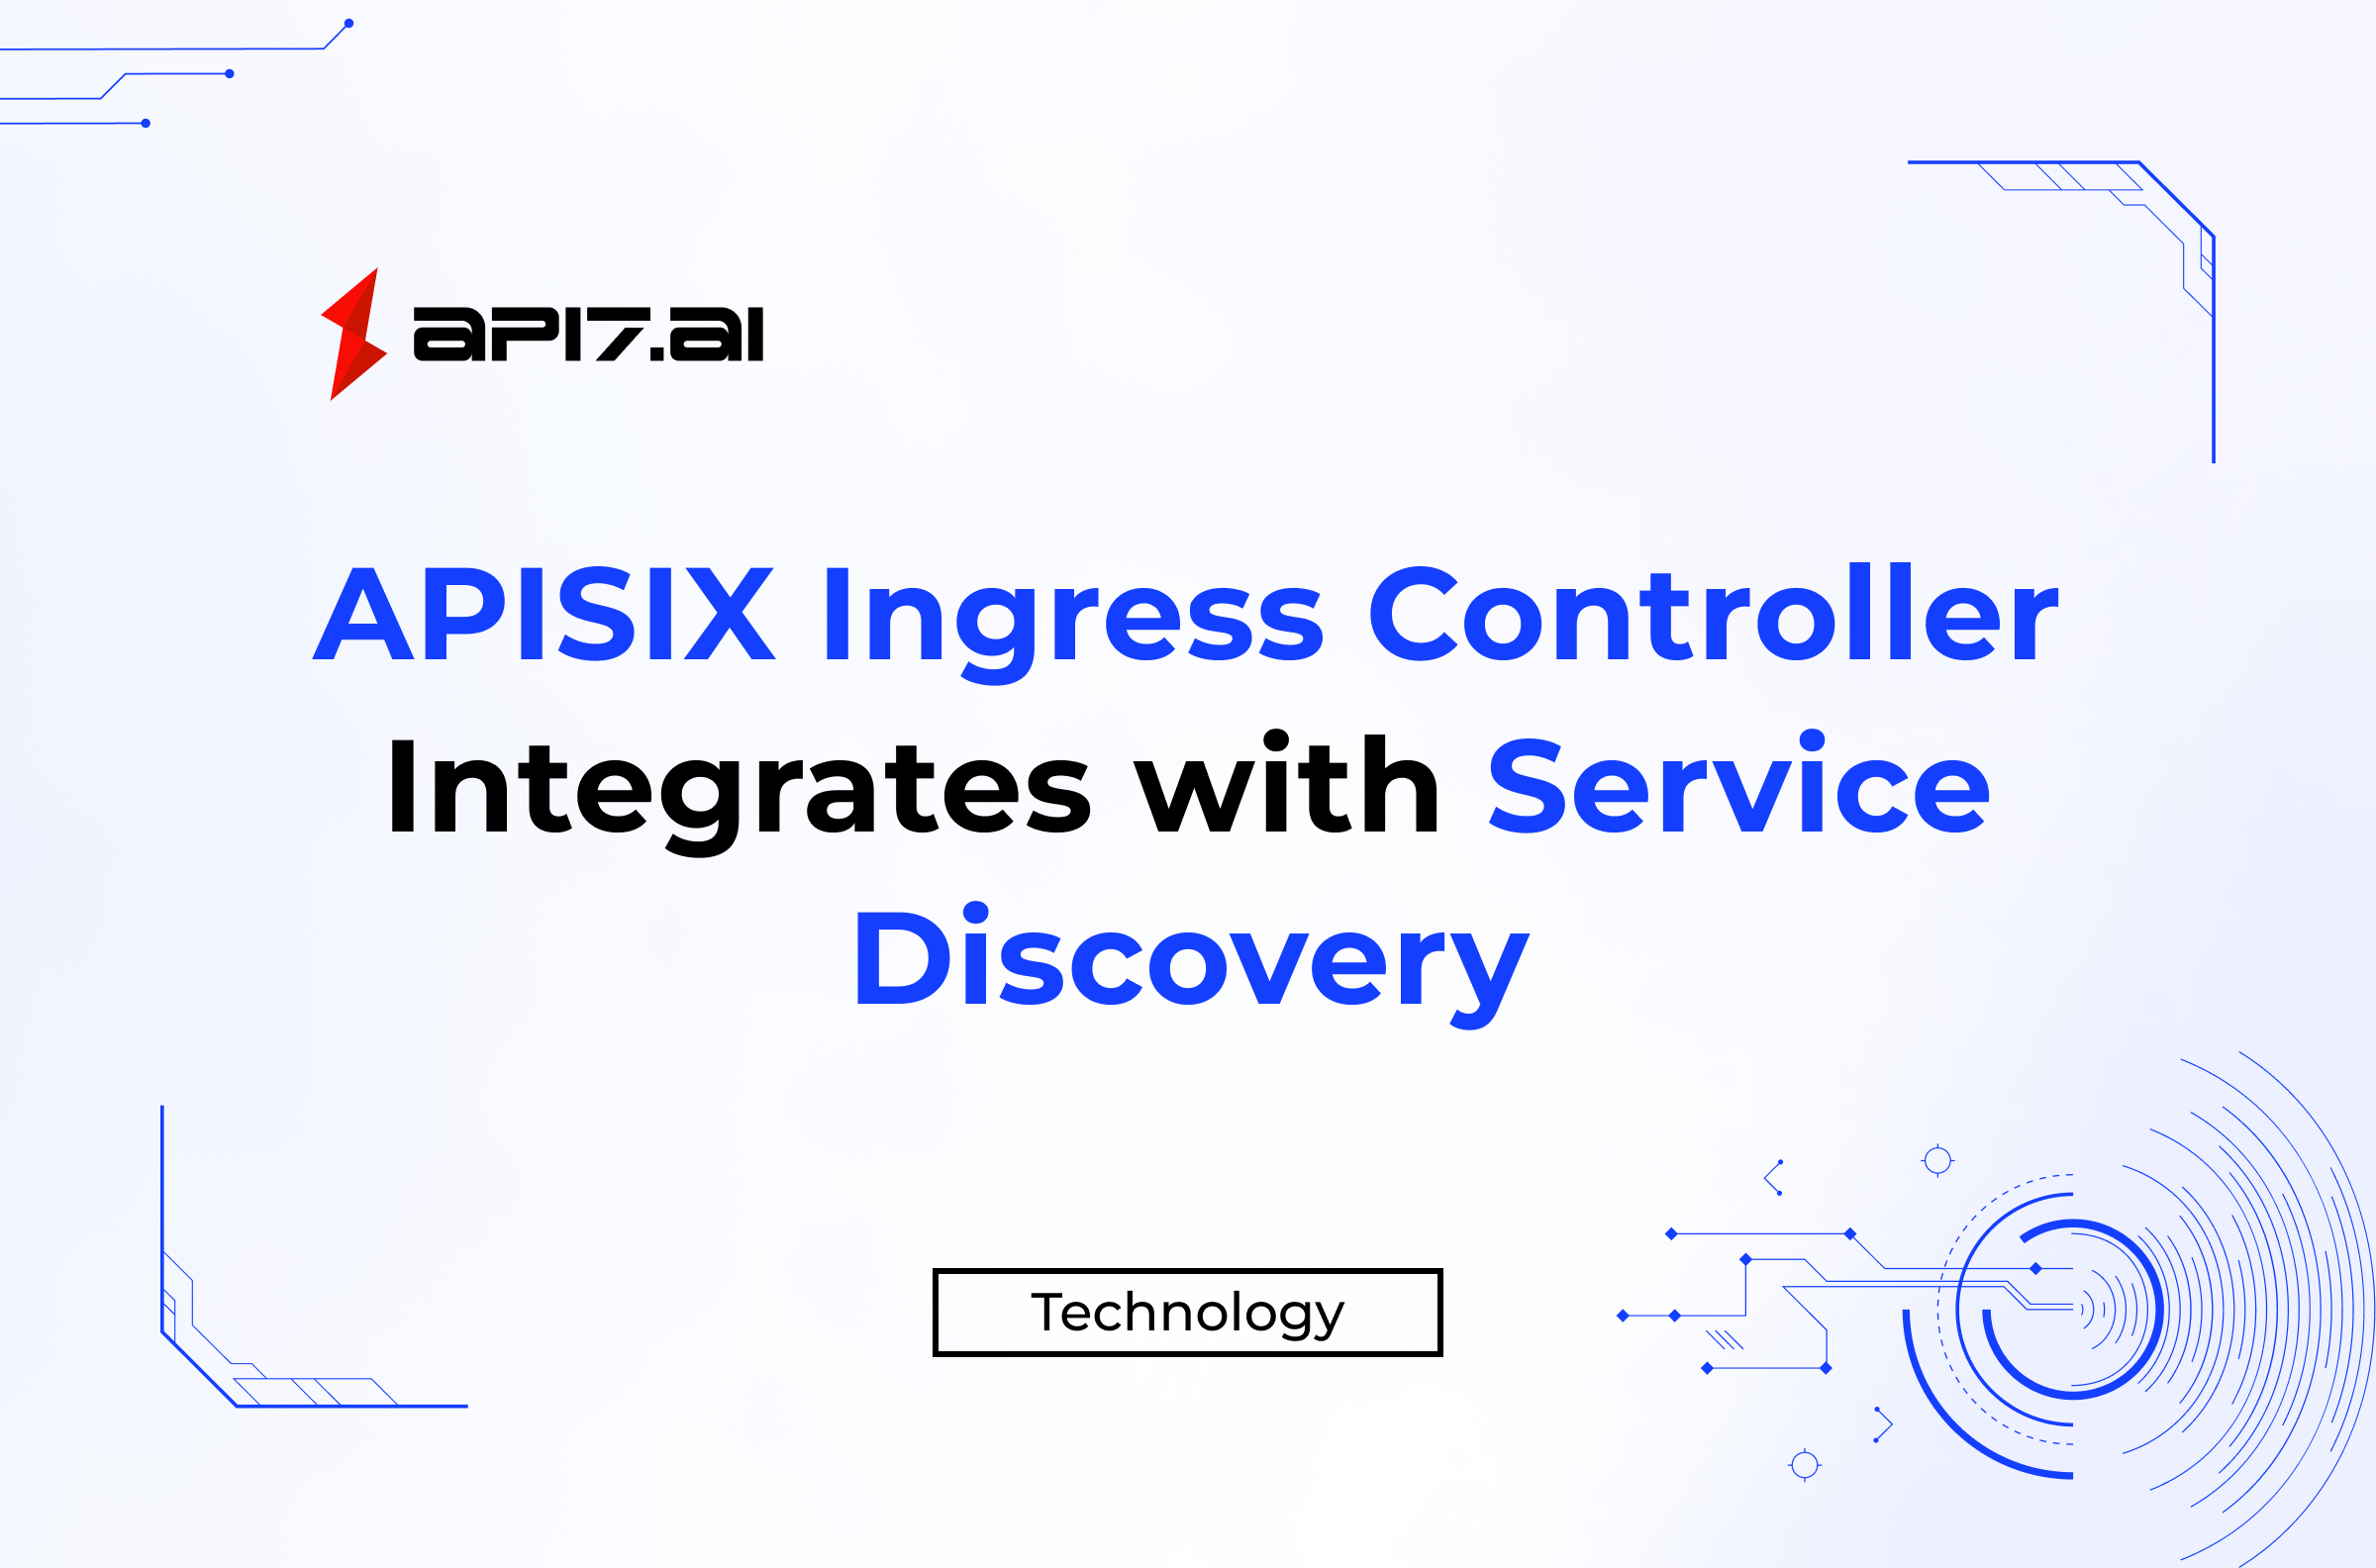 APISIX Ingress Controller Integrates with Service Discovery